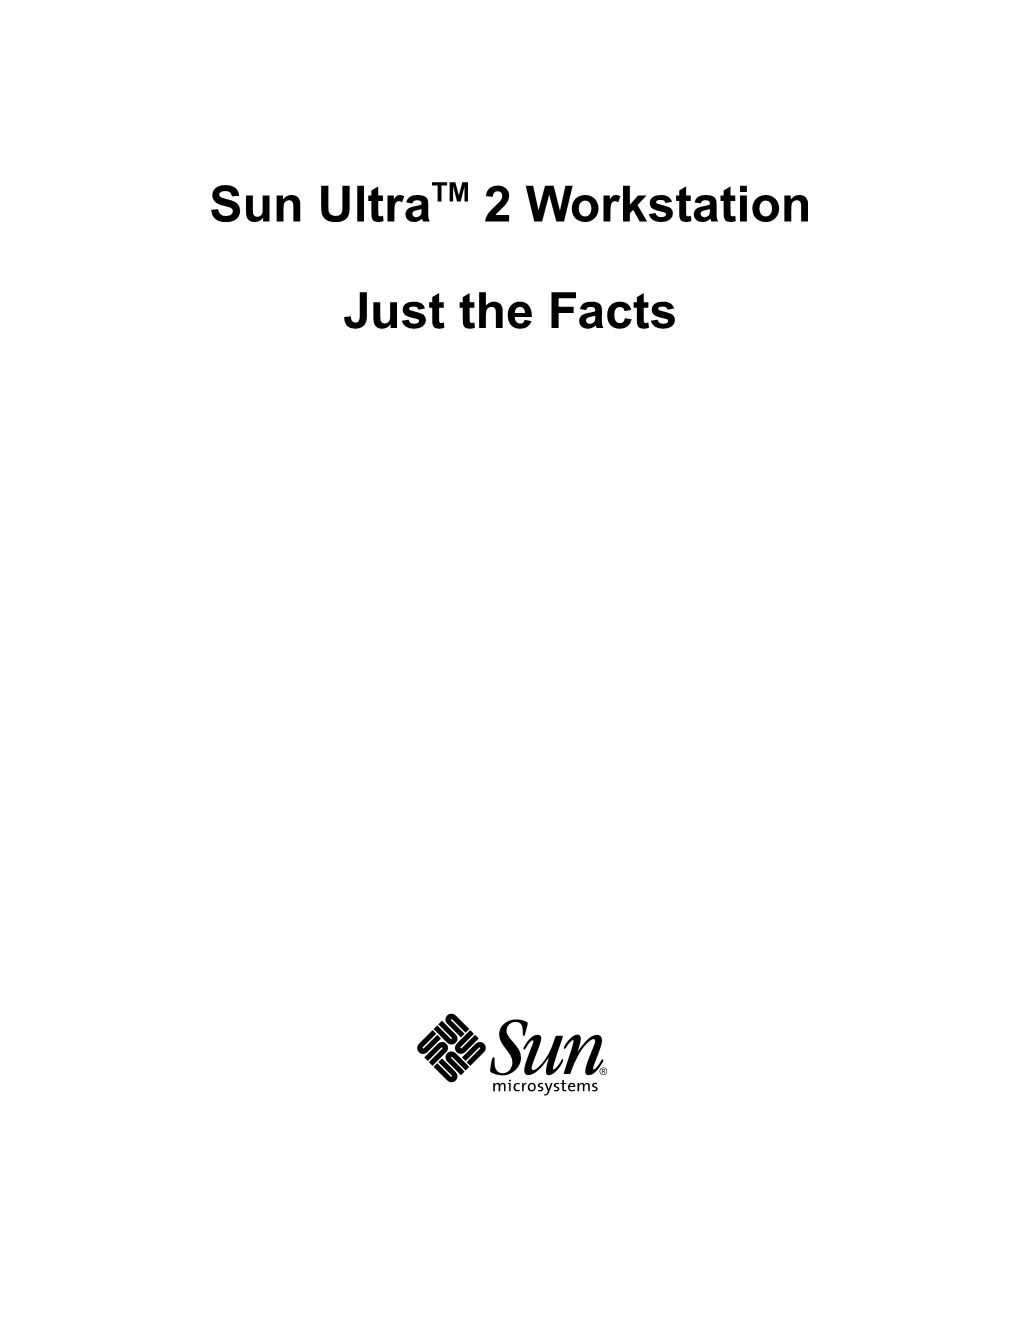 Sun Ultratm 2 Workstation Just the Facts